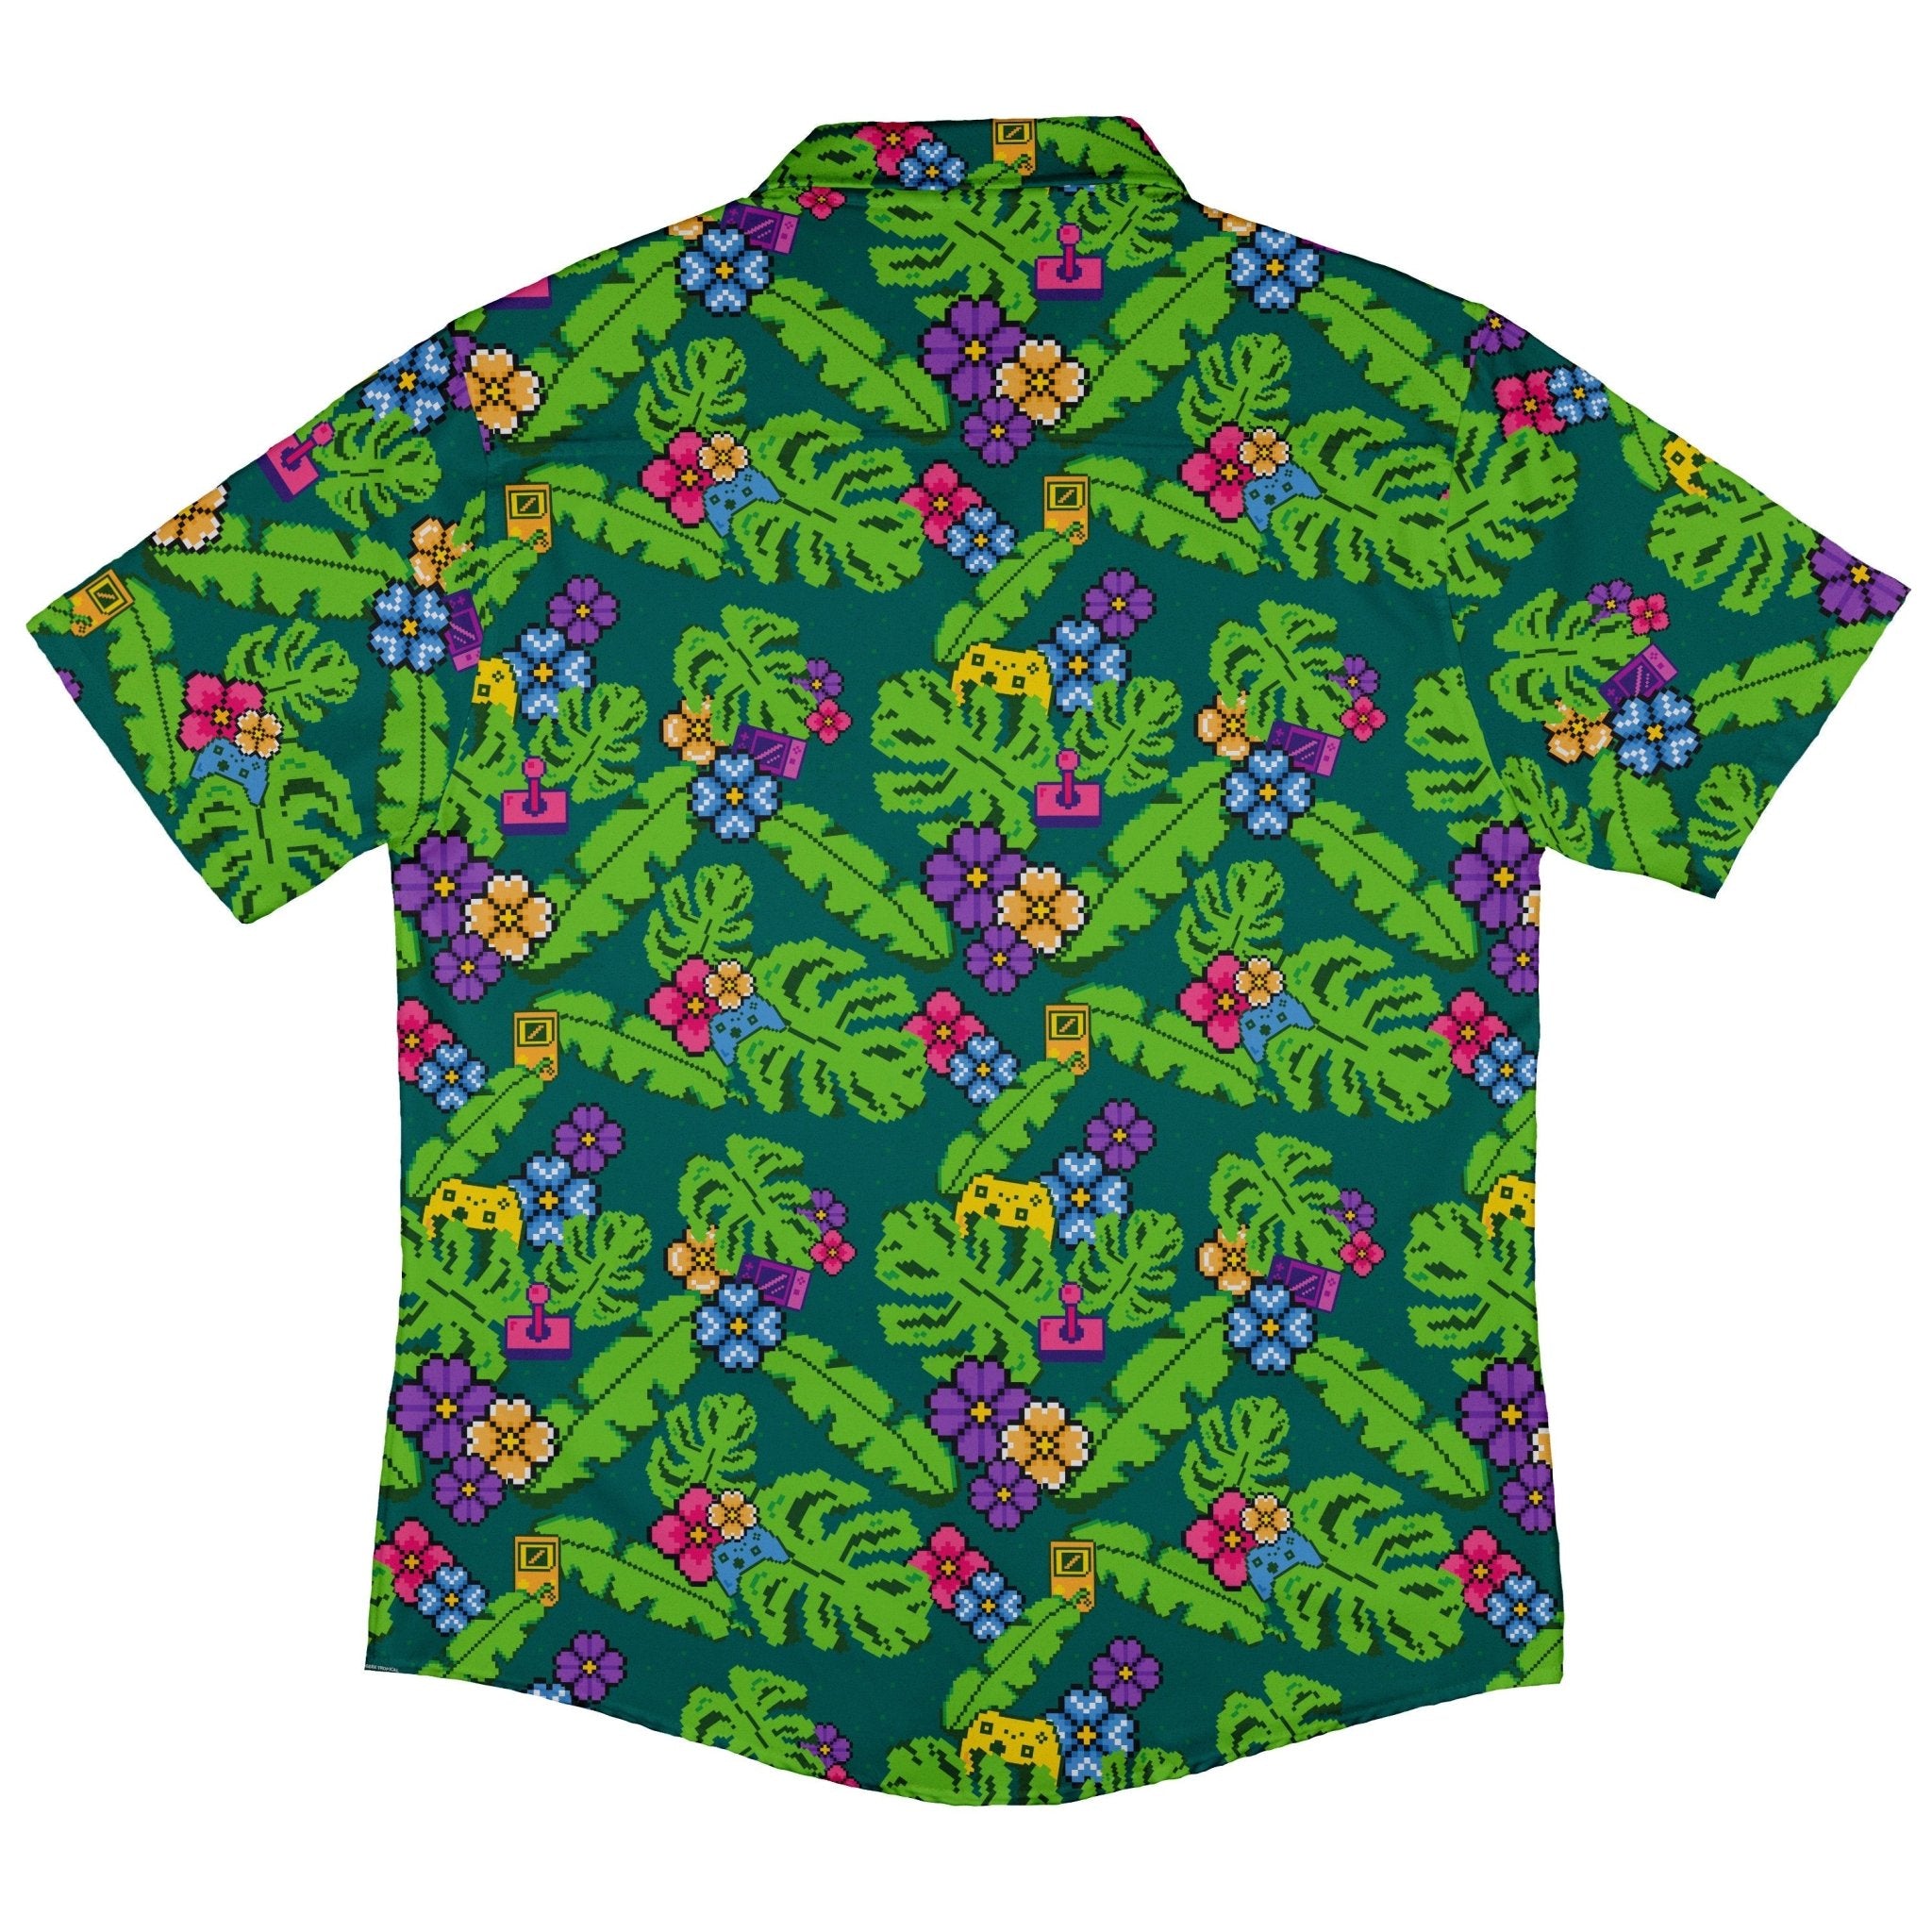 Tropical Video Game Pixels Button Up Shirt - adult sizing - Design by Dunking Toast - Tropical Hawaiian Patterns